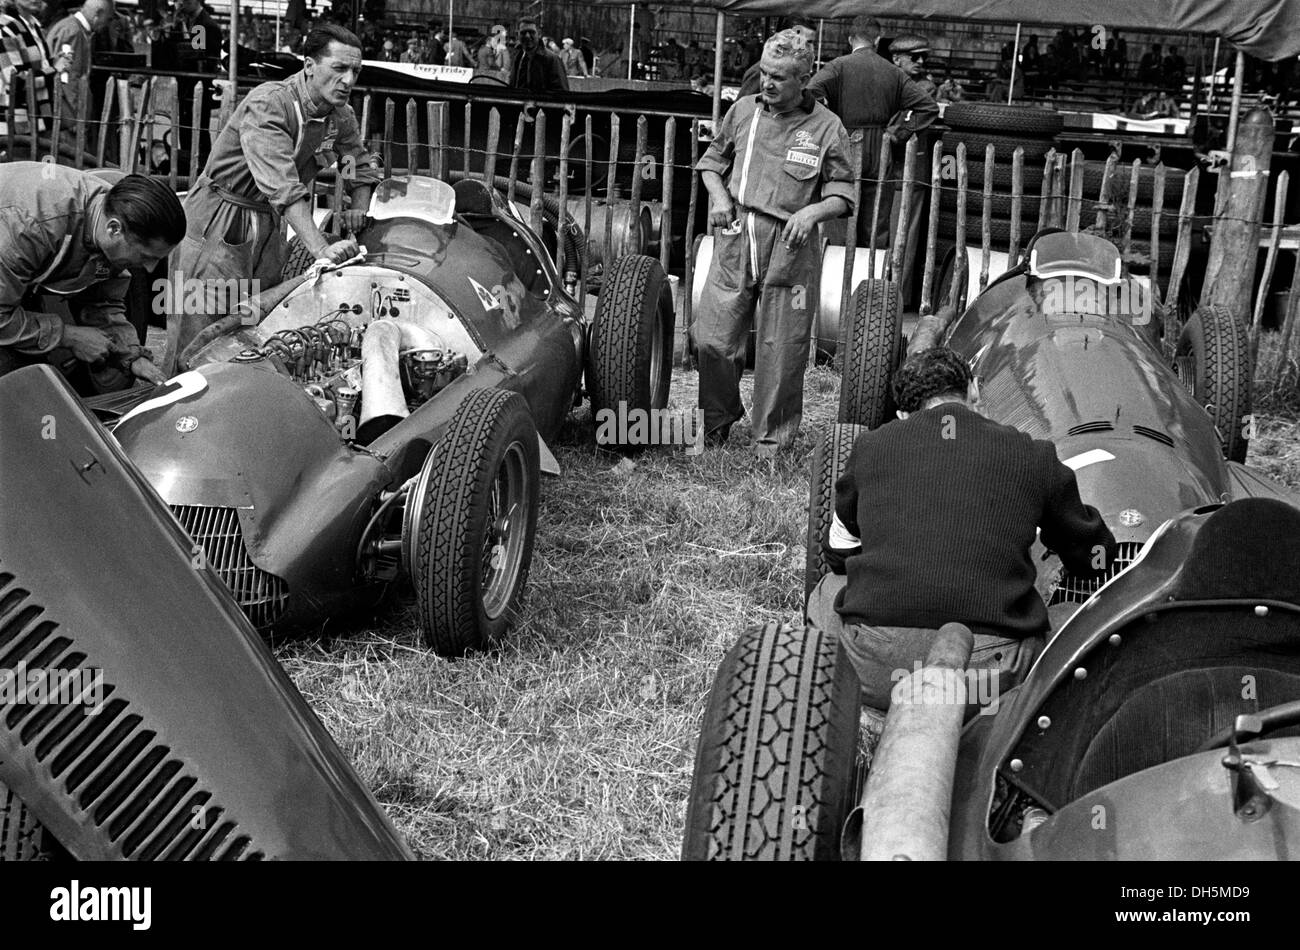 Alfa Romeo 158s being preprared by the team mechanics in the paddock at Silverstone, England 1951. Stock Photo